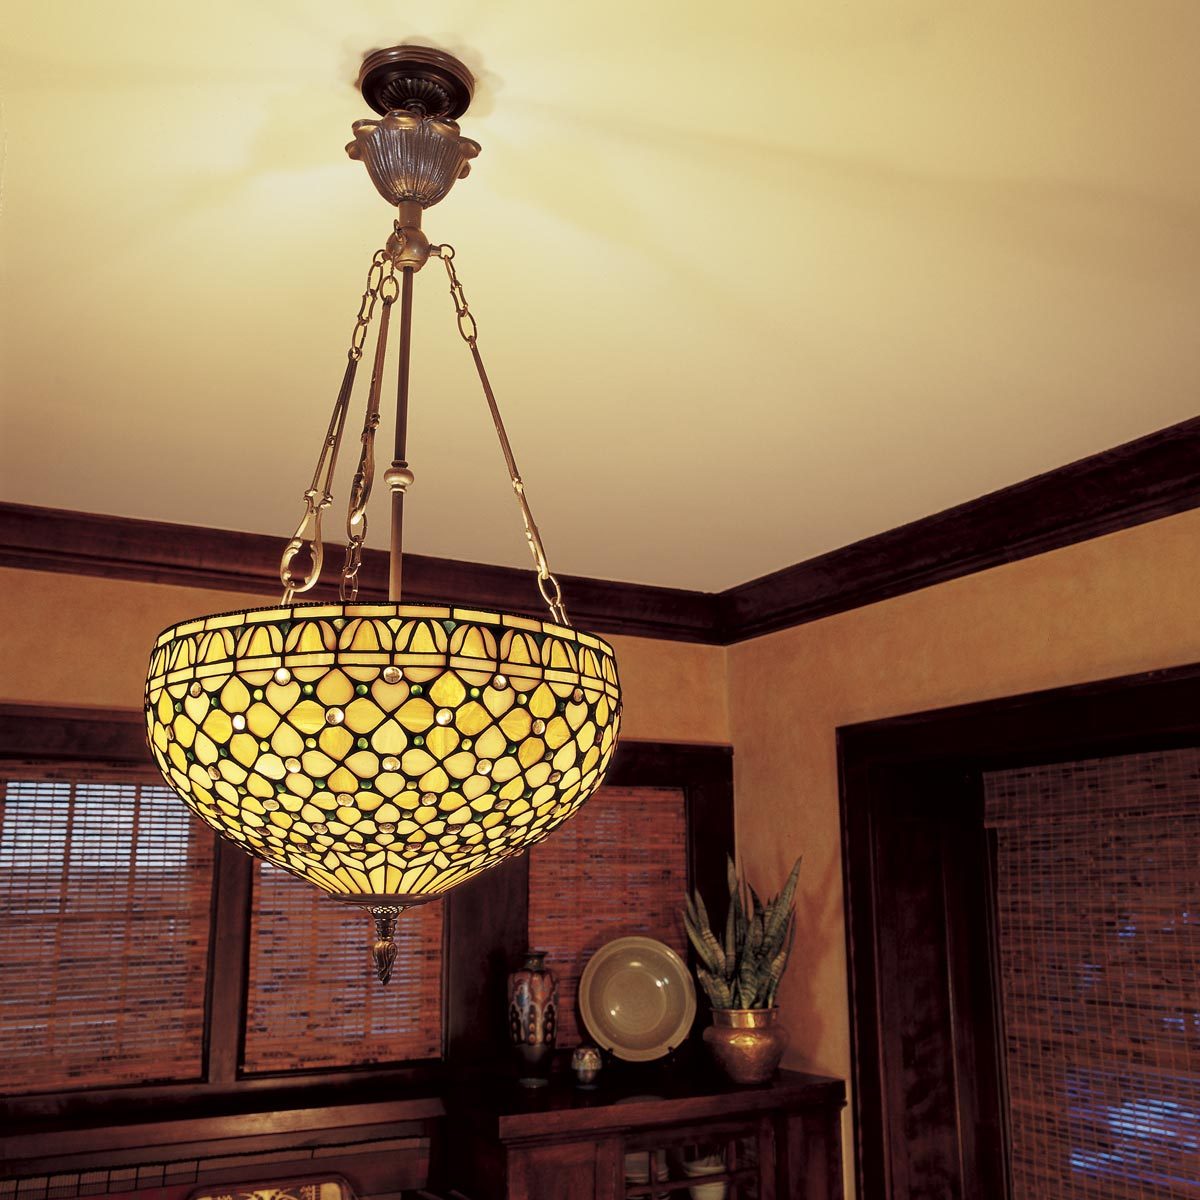 How to Install a Ceiling Light Fixture